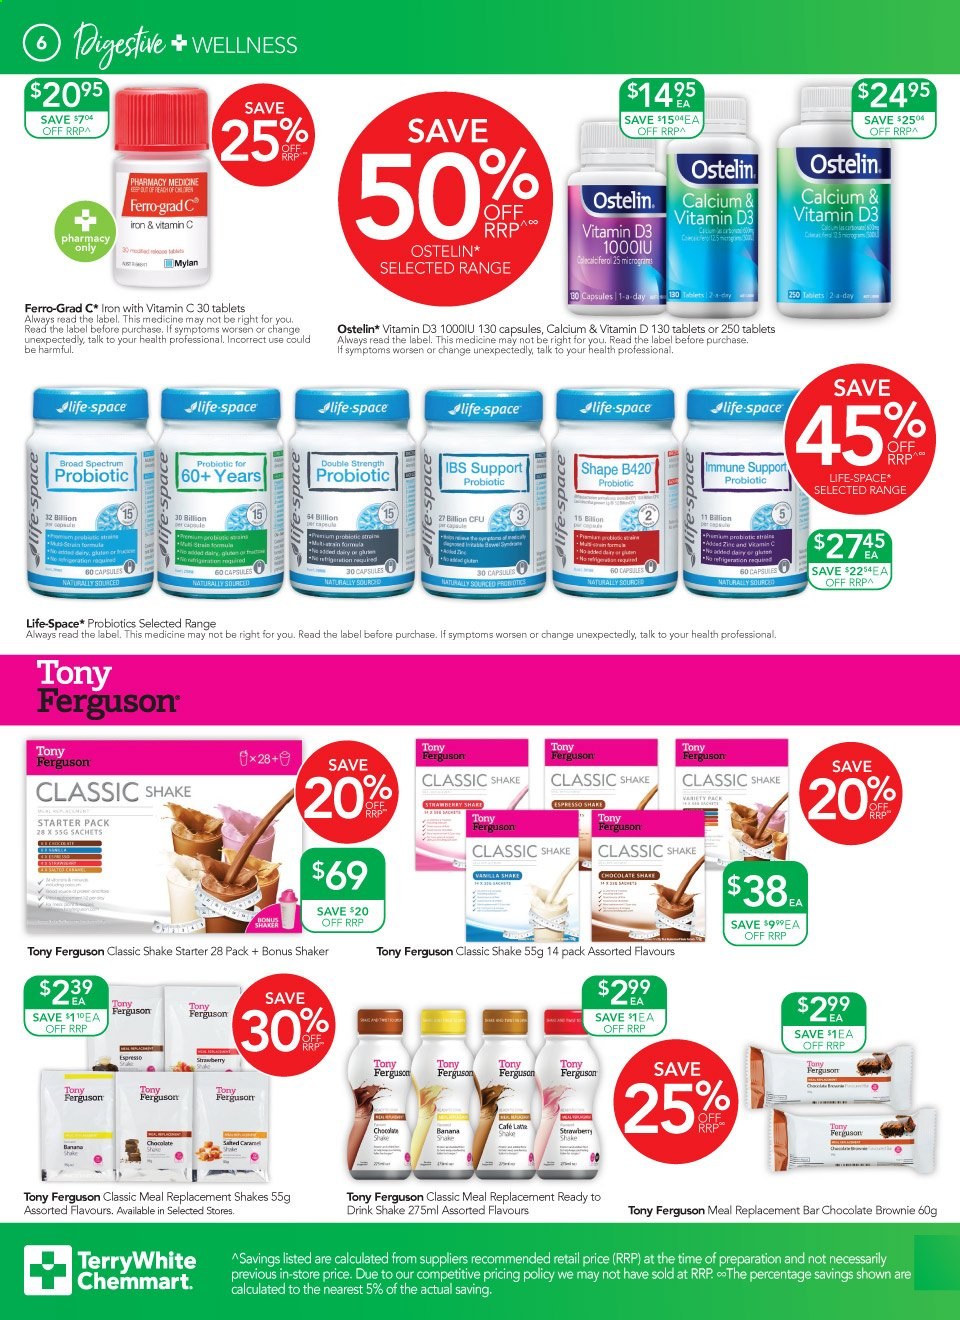 TerryWhite Chemmart catalogue  - 4.3.2021 - 23.3.2021. Page 6.